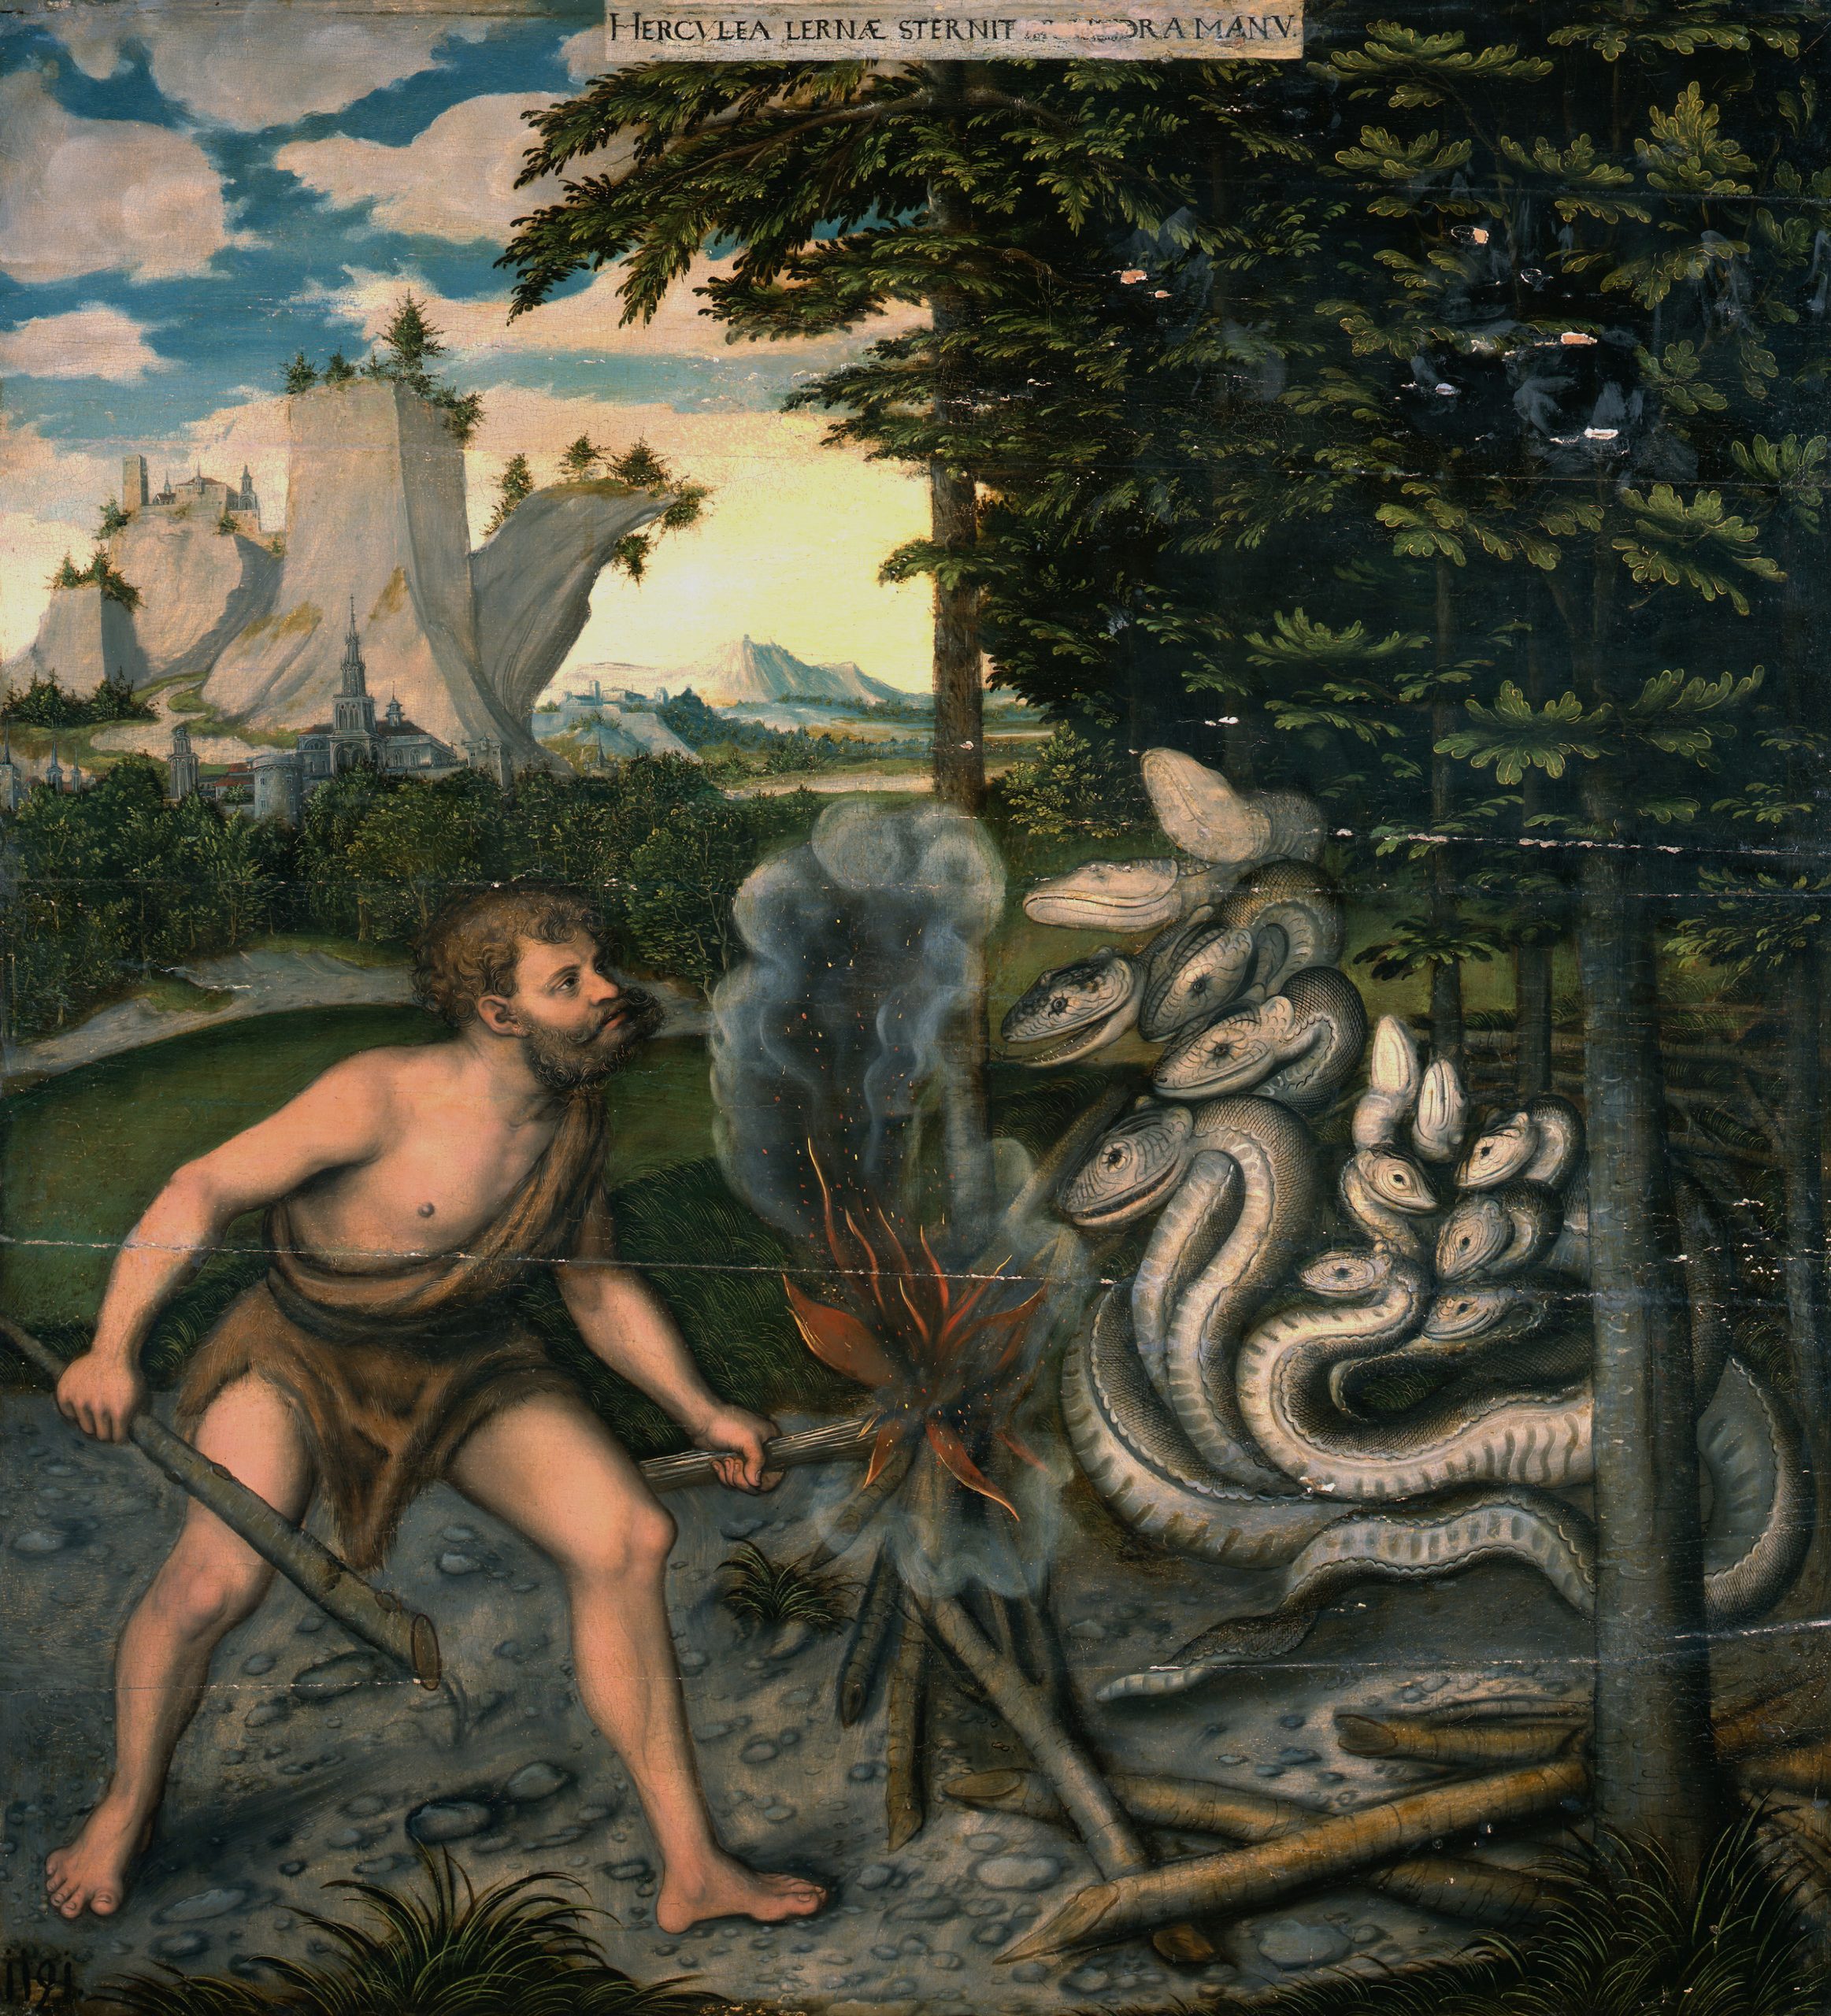 A small fire sits between a man holding a weapon and a large group of snakes who stare at each other in a forest.